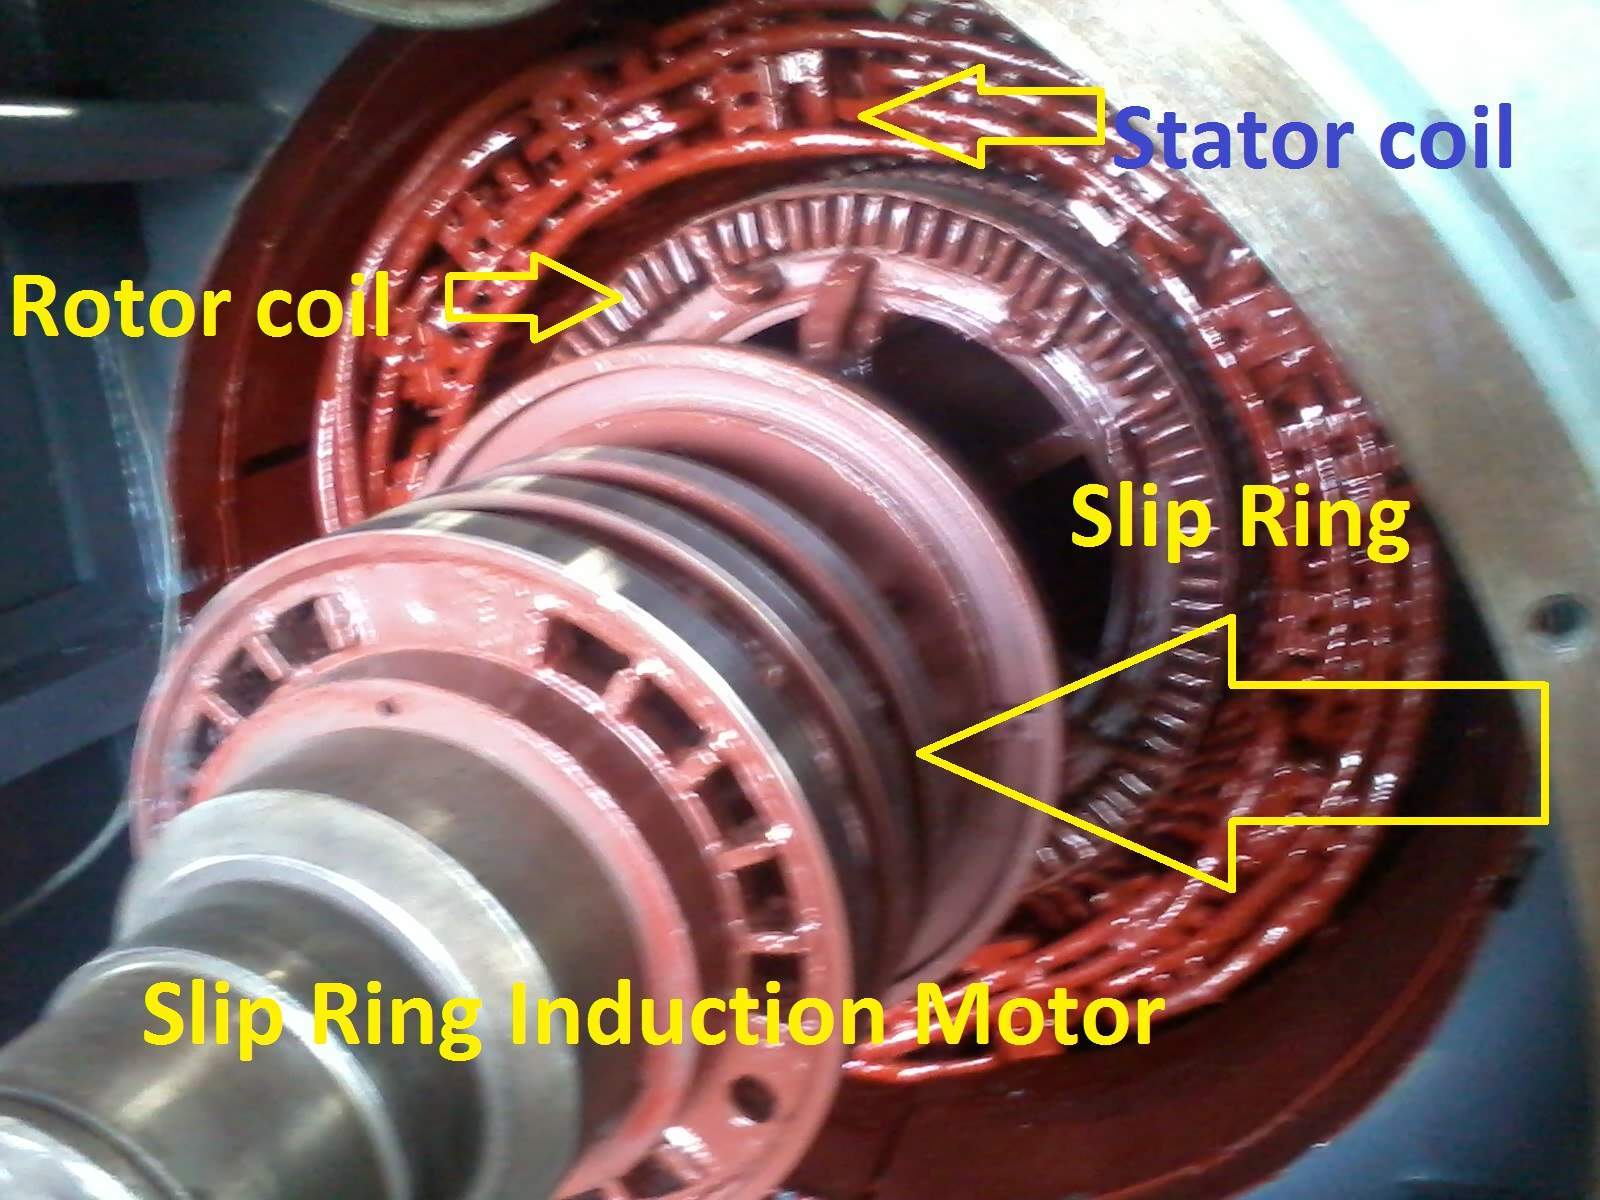 Slip induction motor Practical explanation and Pictured Electrical4u